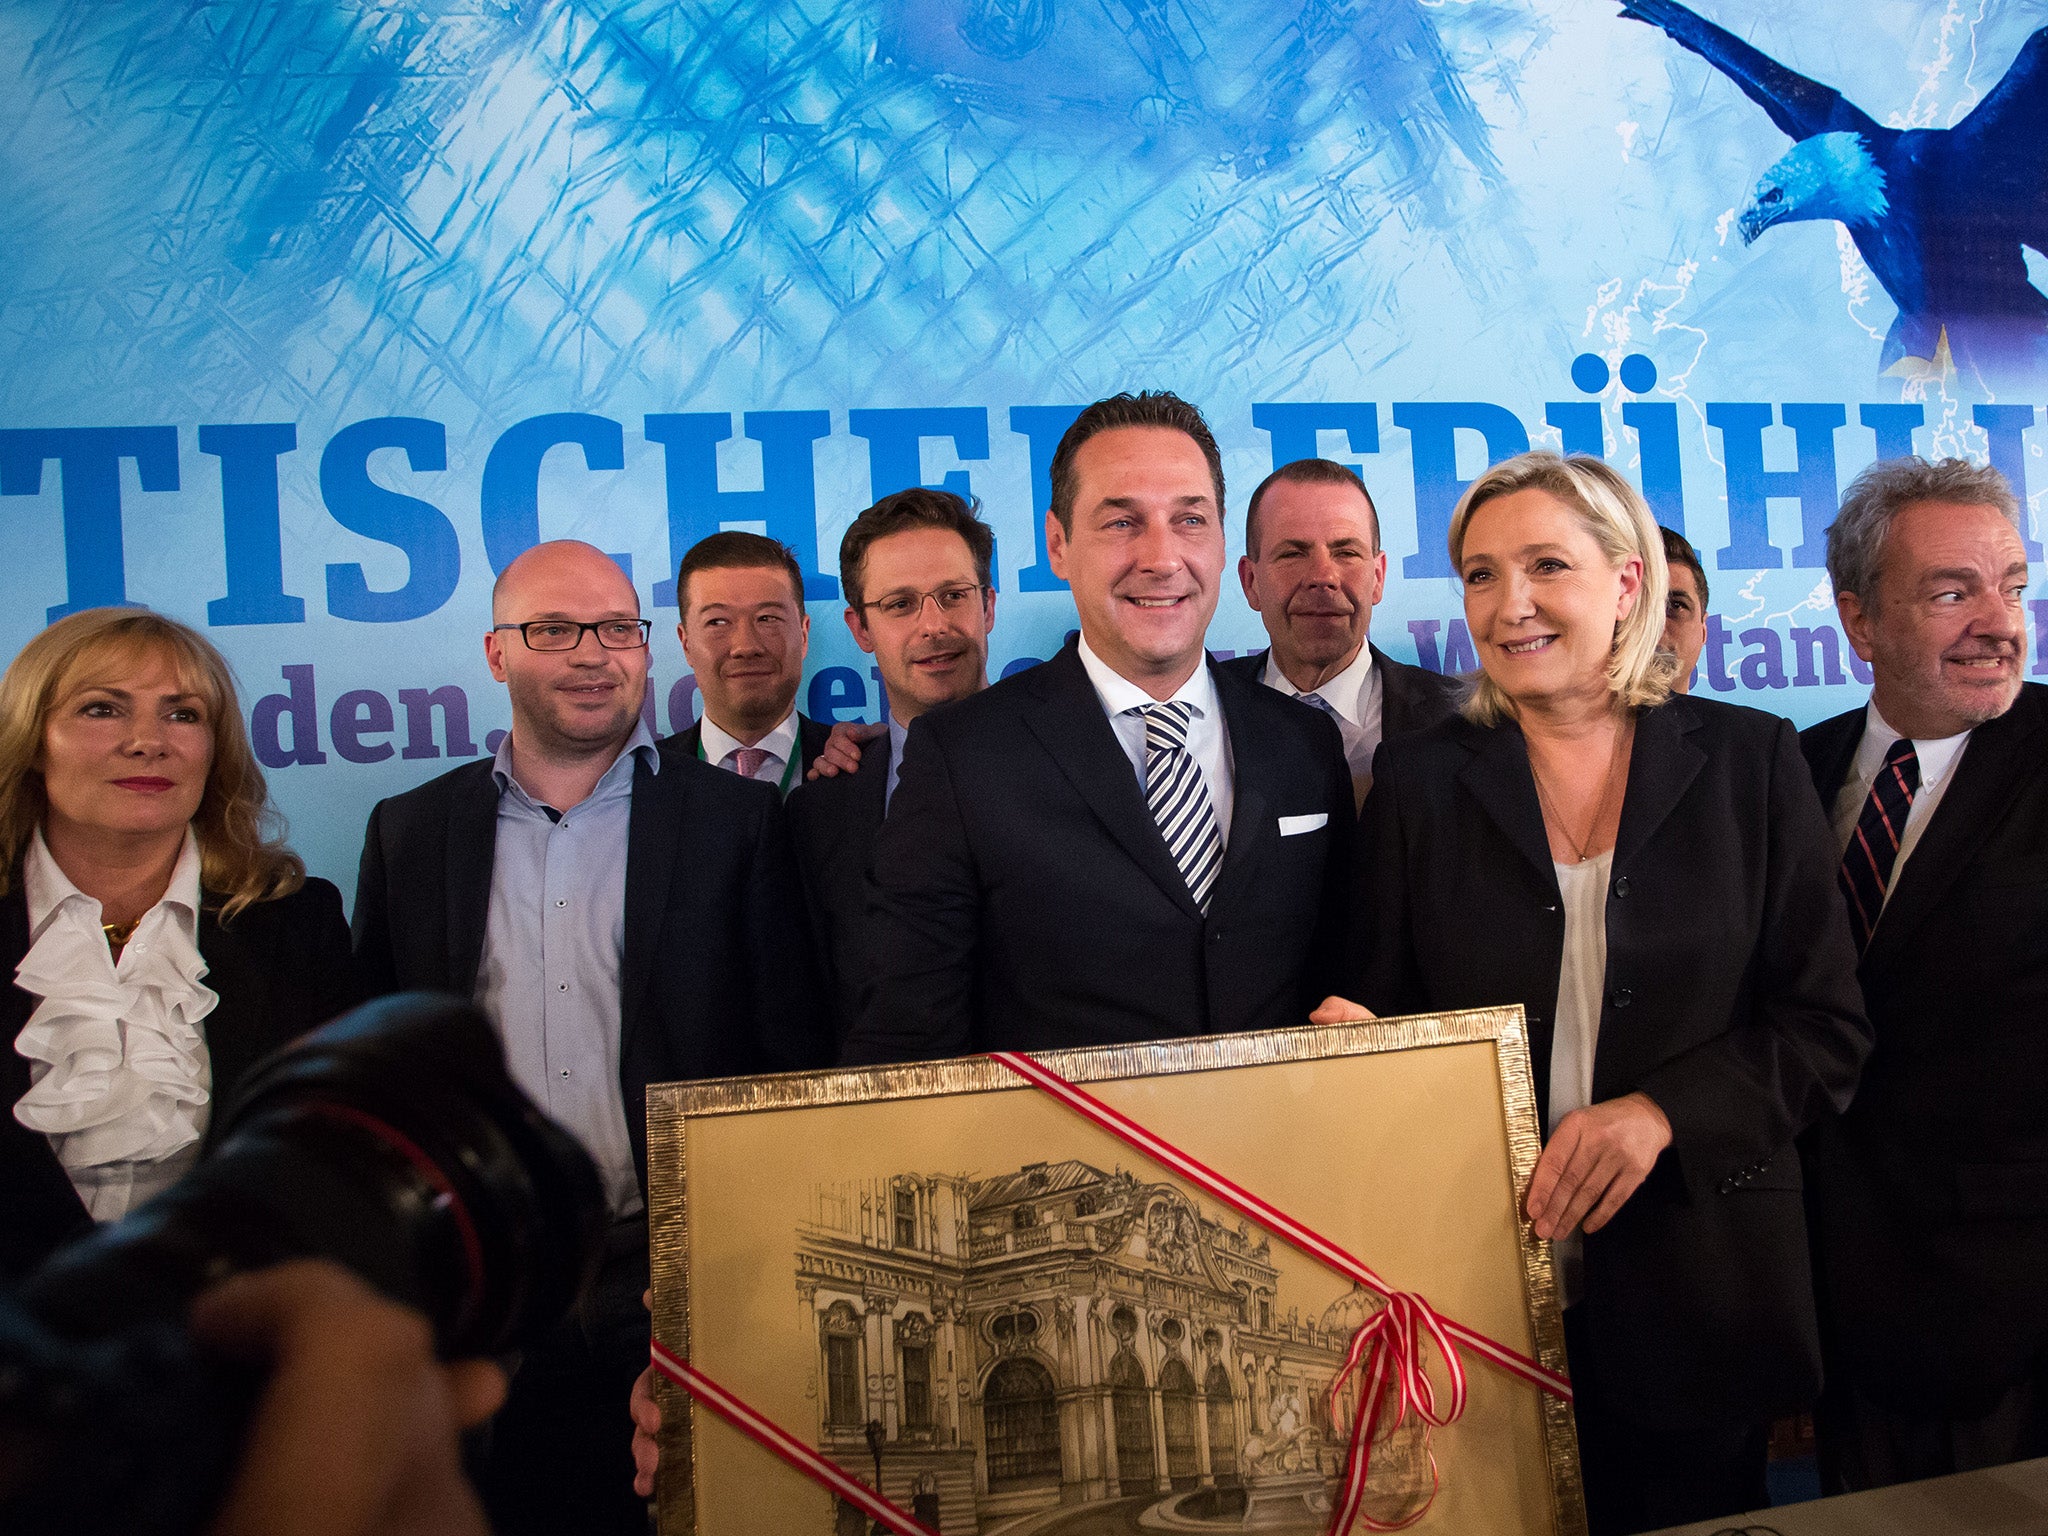 (L to R) Politicians including former Ukip member Janice Atkinson from United Kingdom, Lorenzo Fontana from Veneto, Tomio Okamura from Czech Republic, Marcus Pretzell from Germany, Hans Christian Strache from Austria, Harald Vilimsky from Austria, Marie Le Pen from France and Gerolf Annemans from Flanders pose for photographers at meeting in Vienna in June 2016